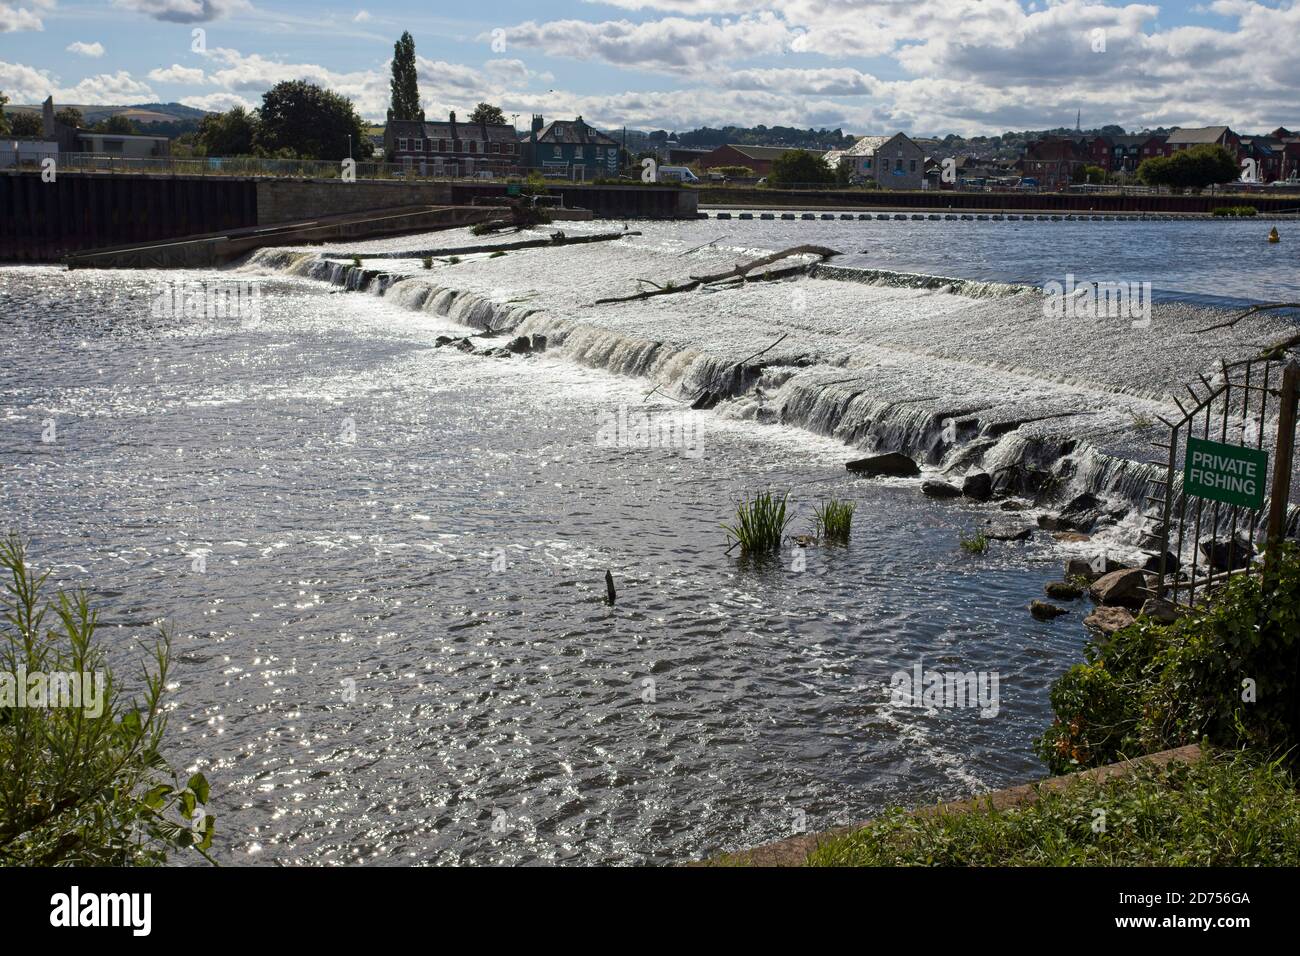 Weir on the River Exe, contrejour, Exeter, Devon, England, UK. Stock Photo